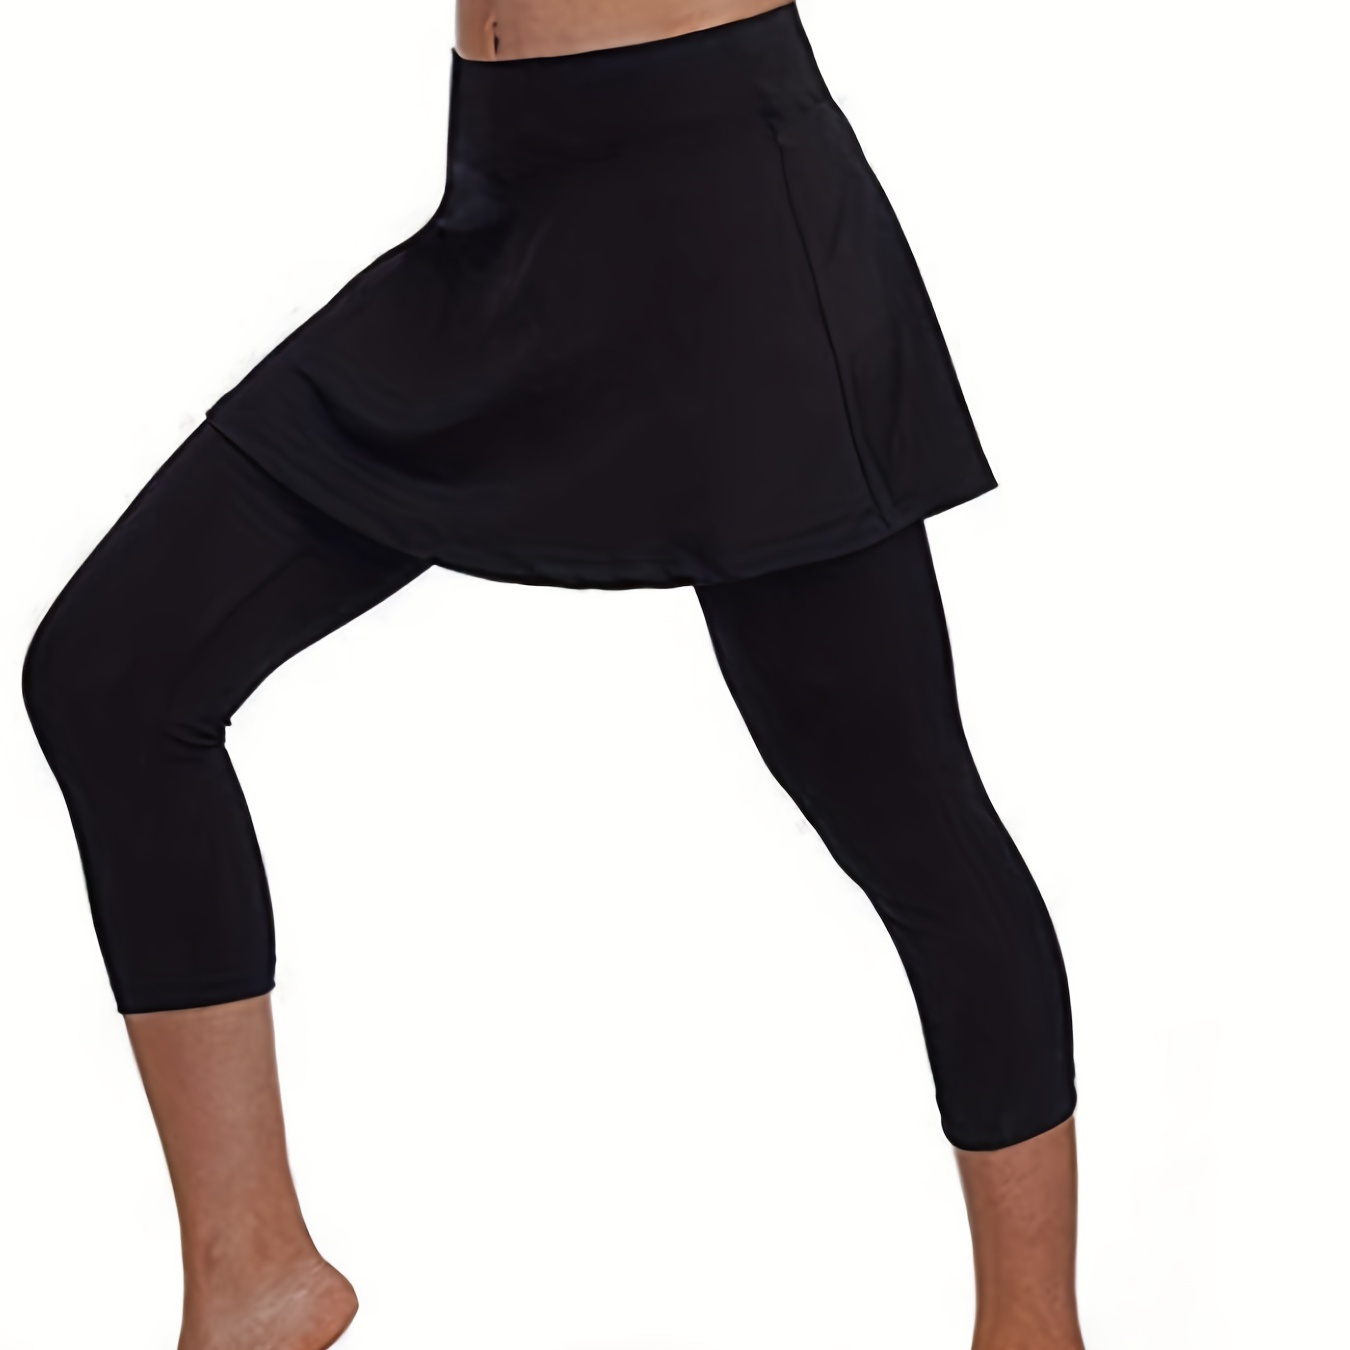 

2 Pieces High Waist Tummy Control Yoga Leggings With Skirt - Women's Activewear For Running, Fitness, And Dance - Black